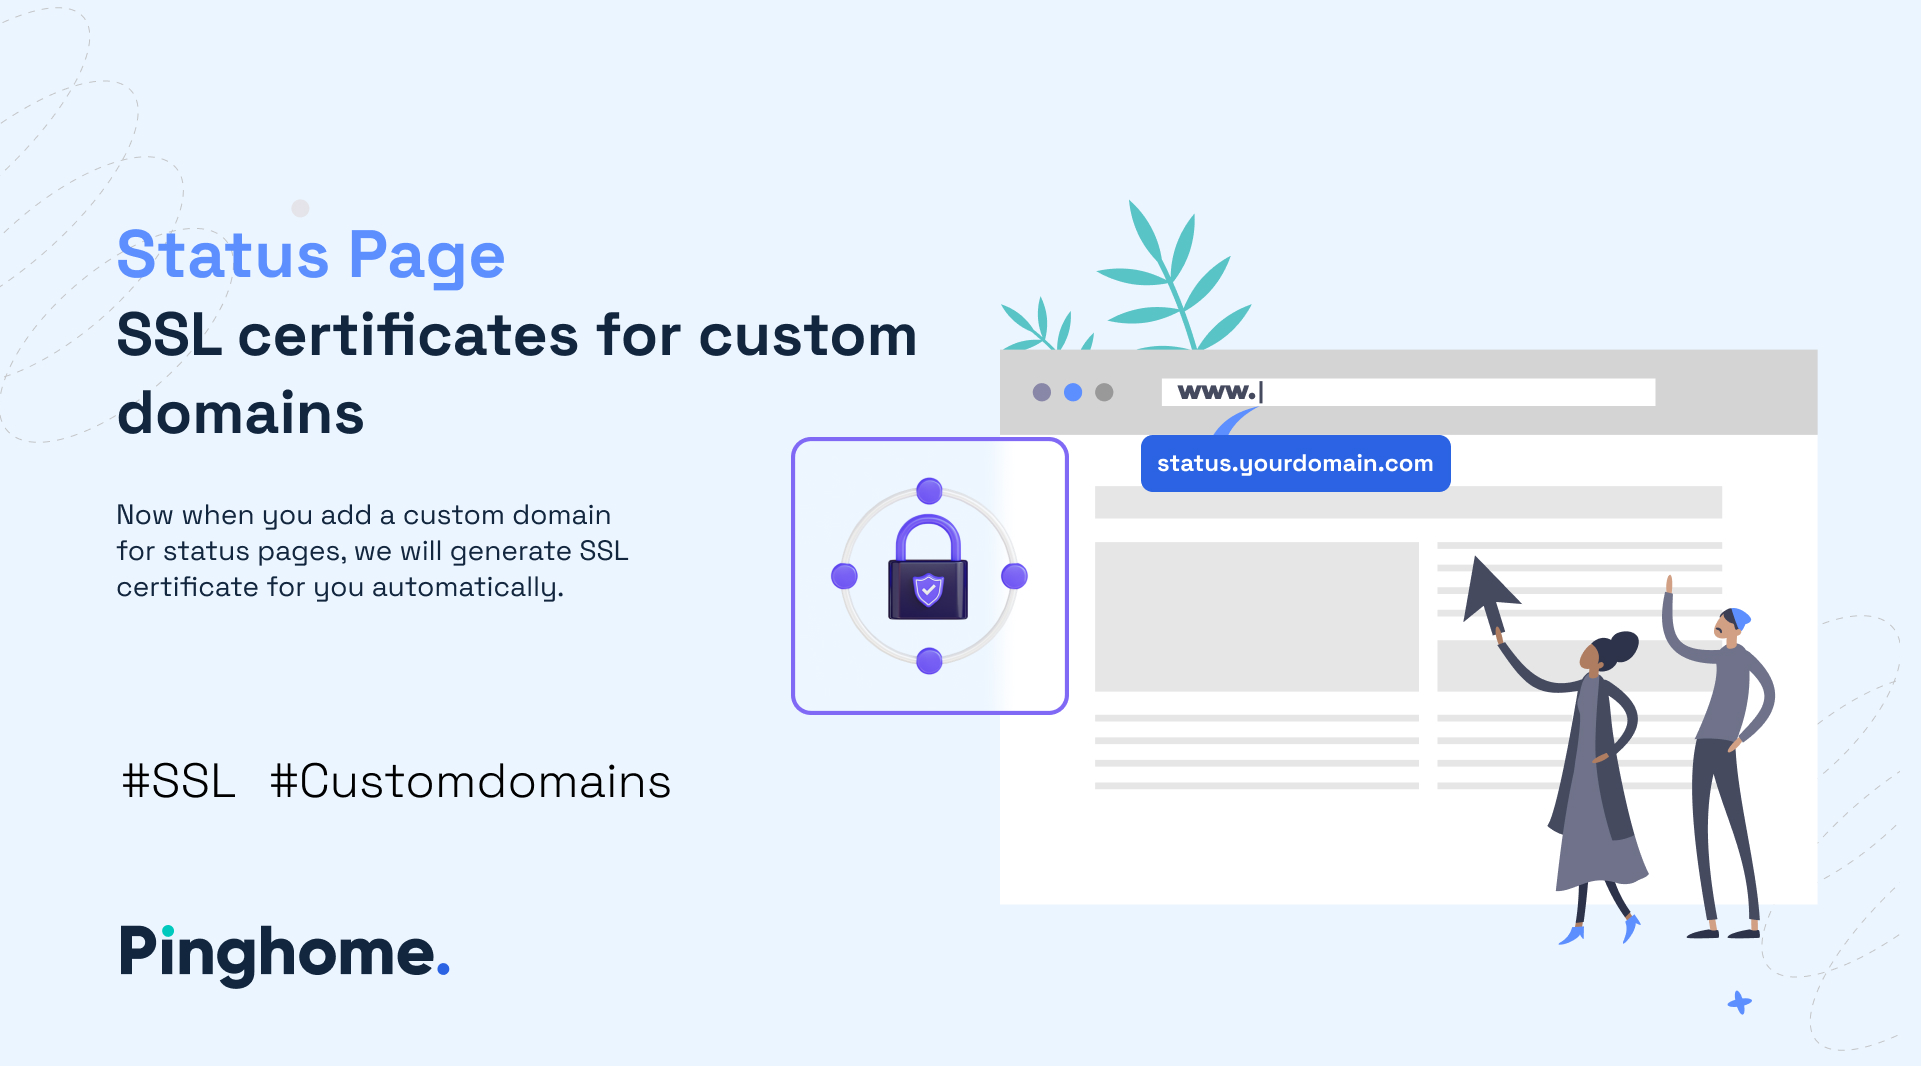 SSL certificates for custom domains at Pinghome